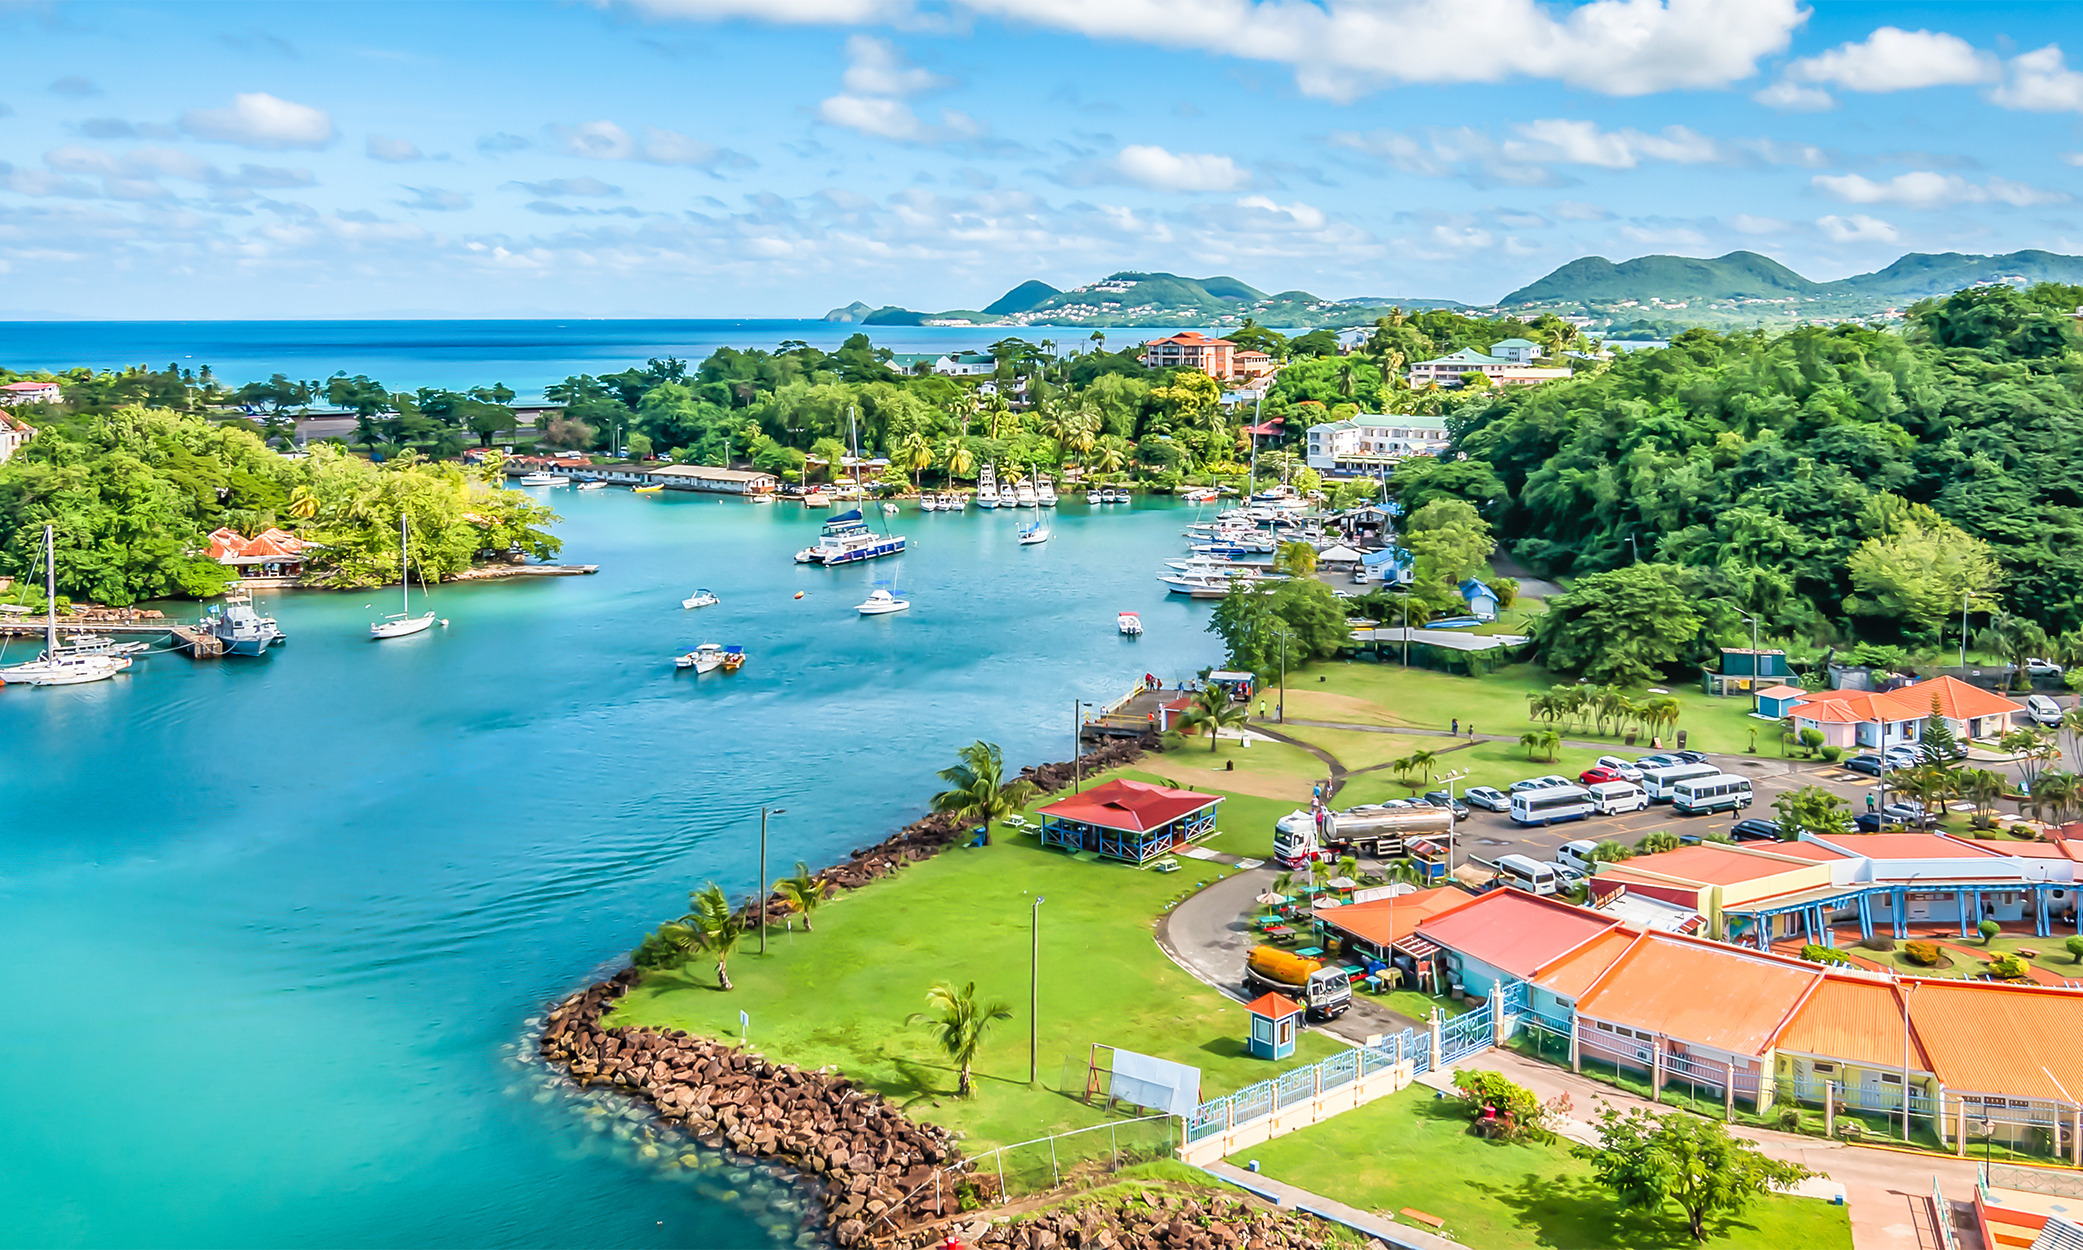 St Lucia Reduces Real Estate Price And Introduces New Bond Offer, Among Other Changes